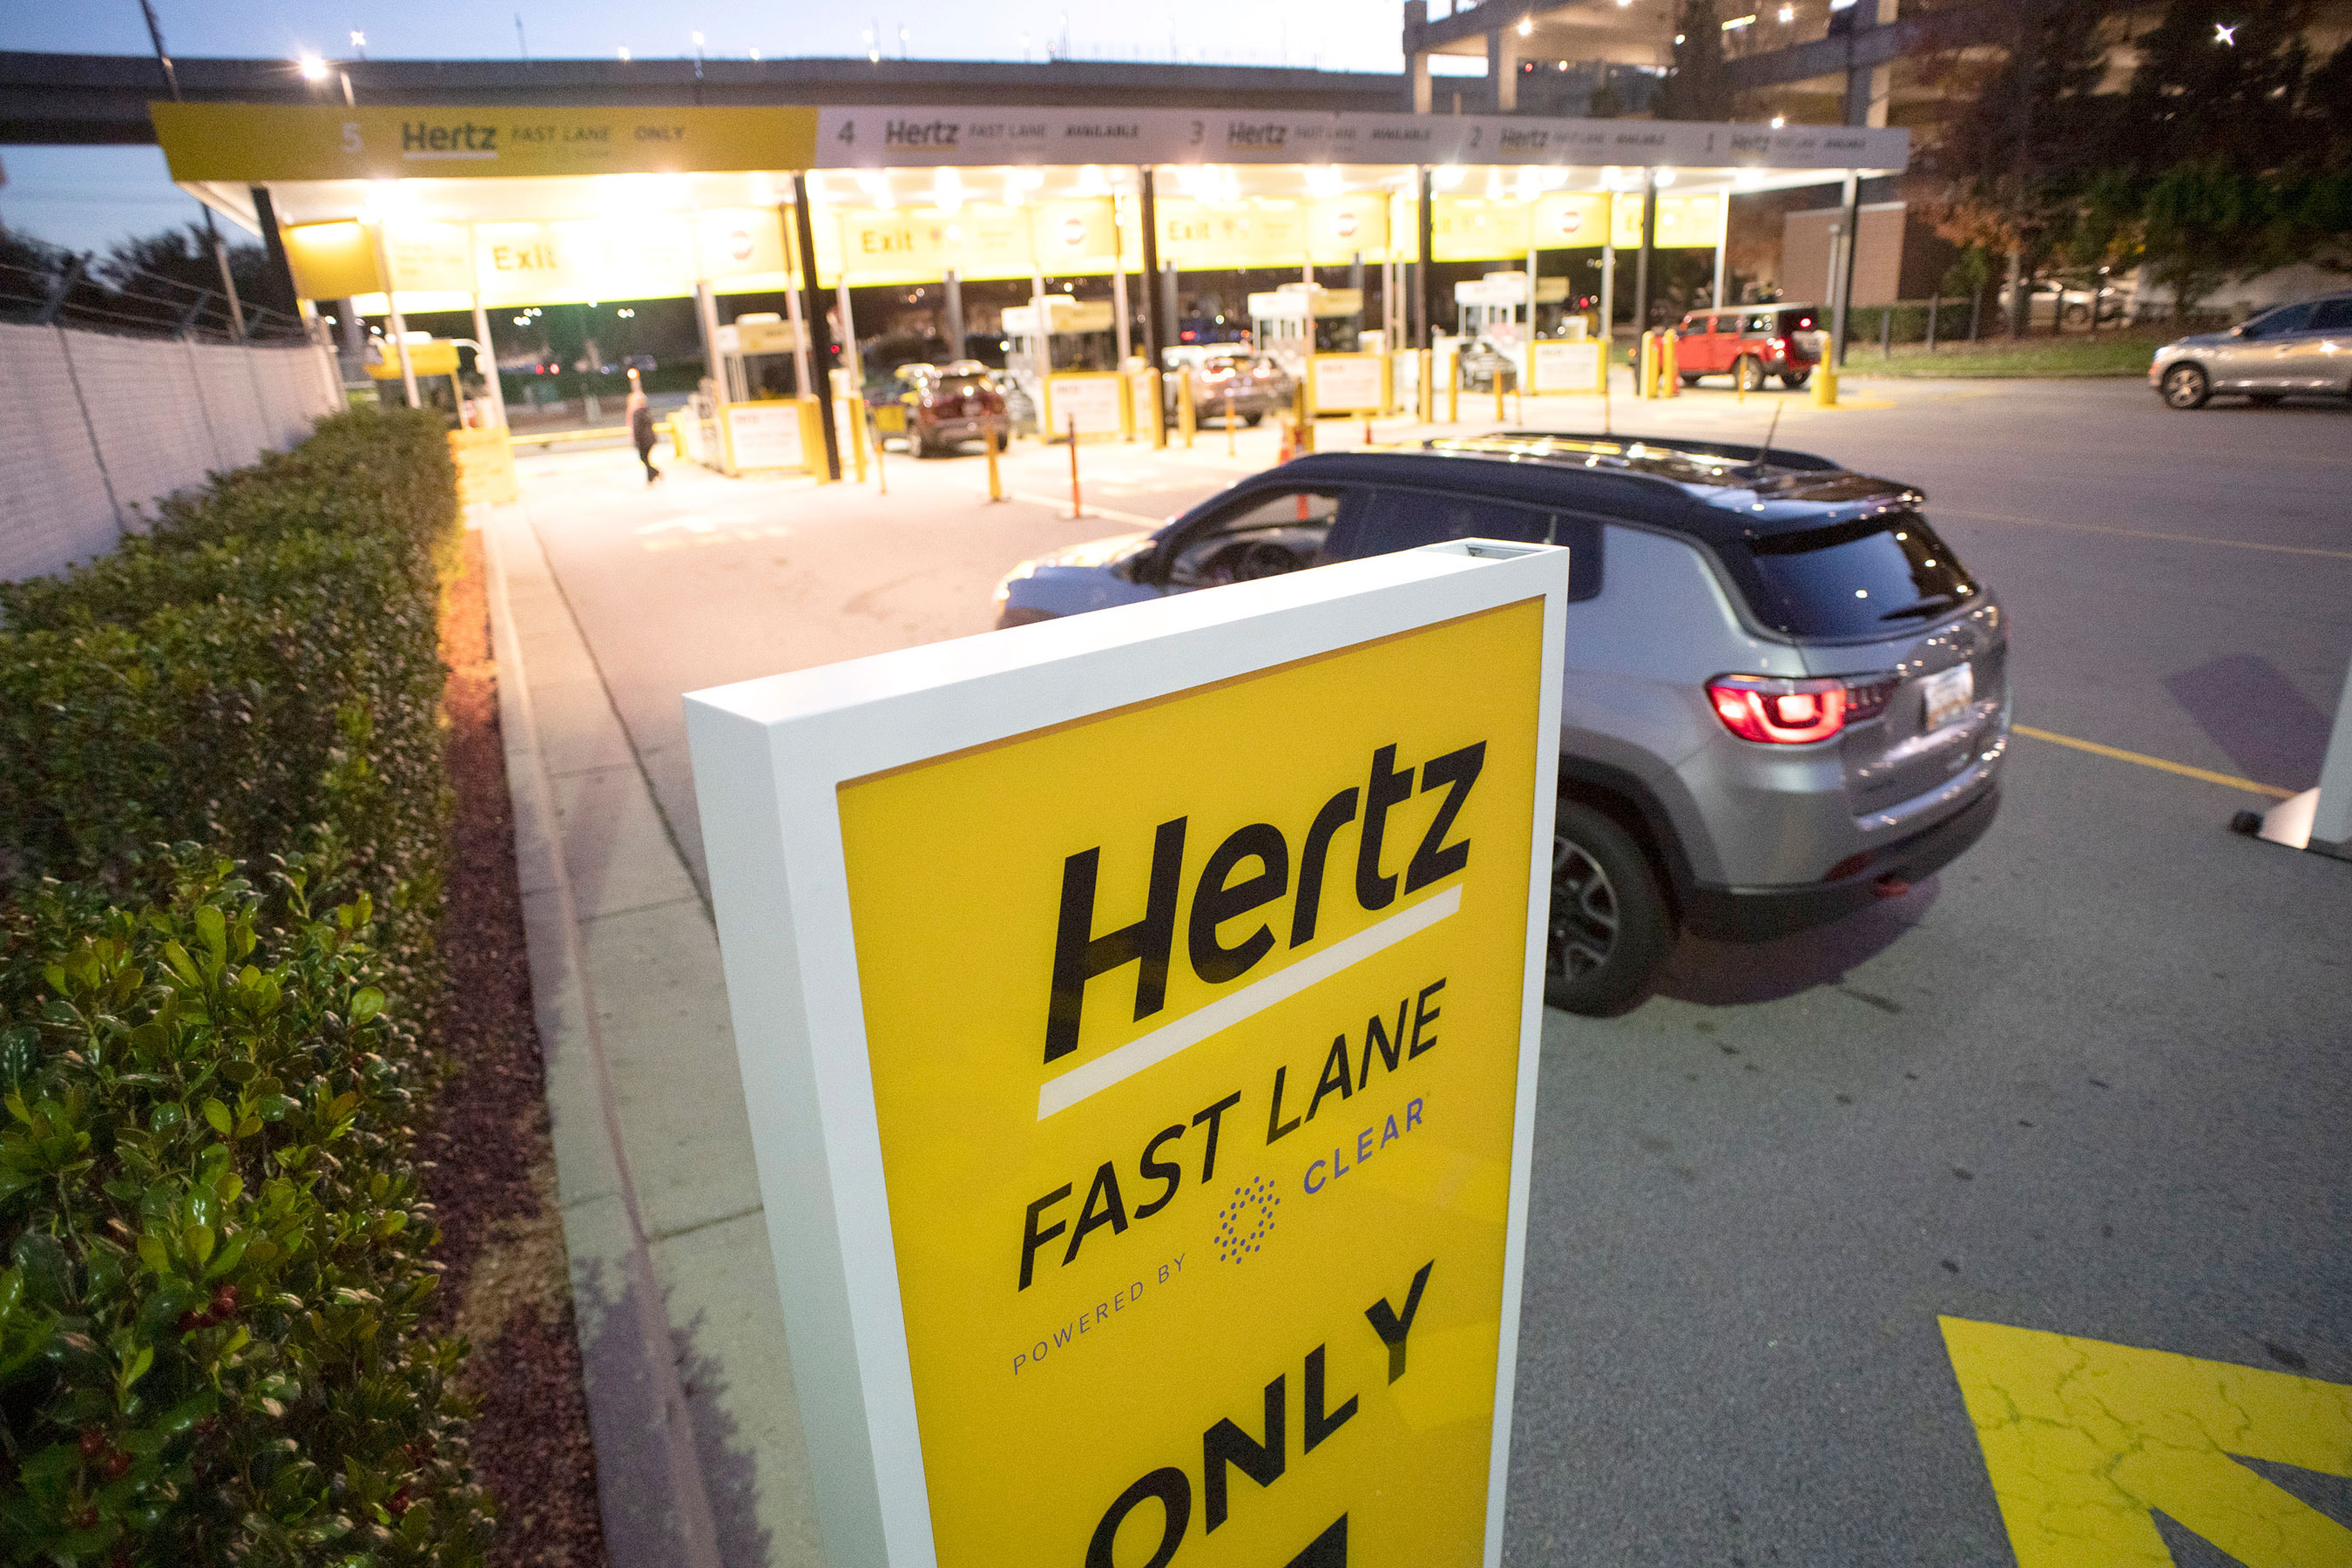 Hertz Fast Lane powered by CLEAR